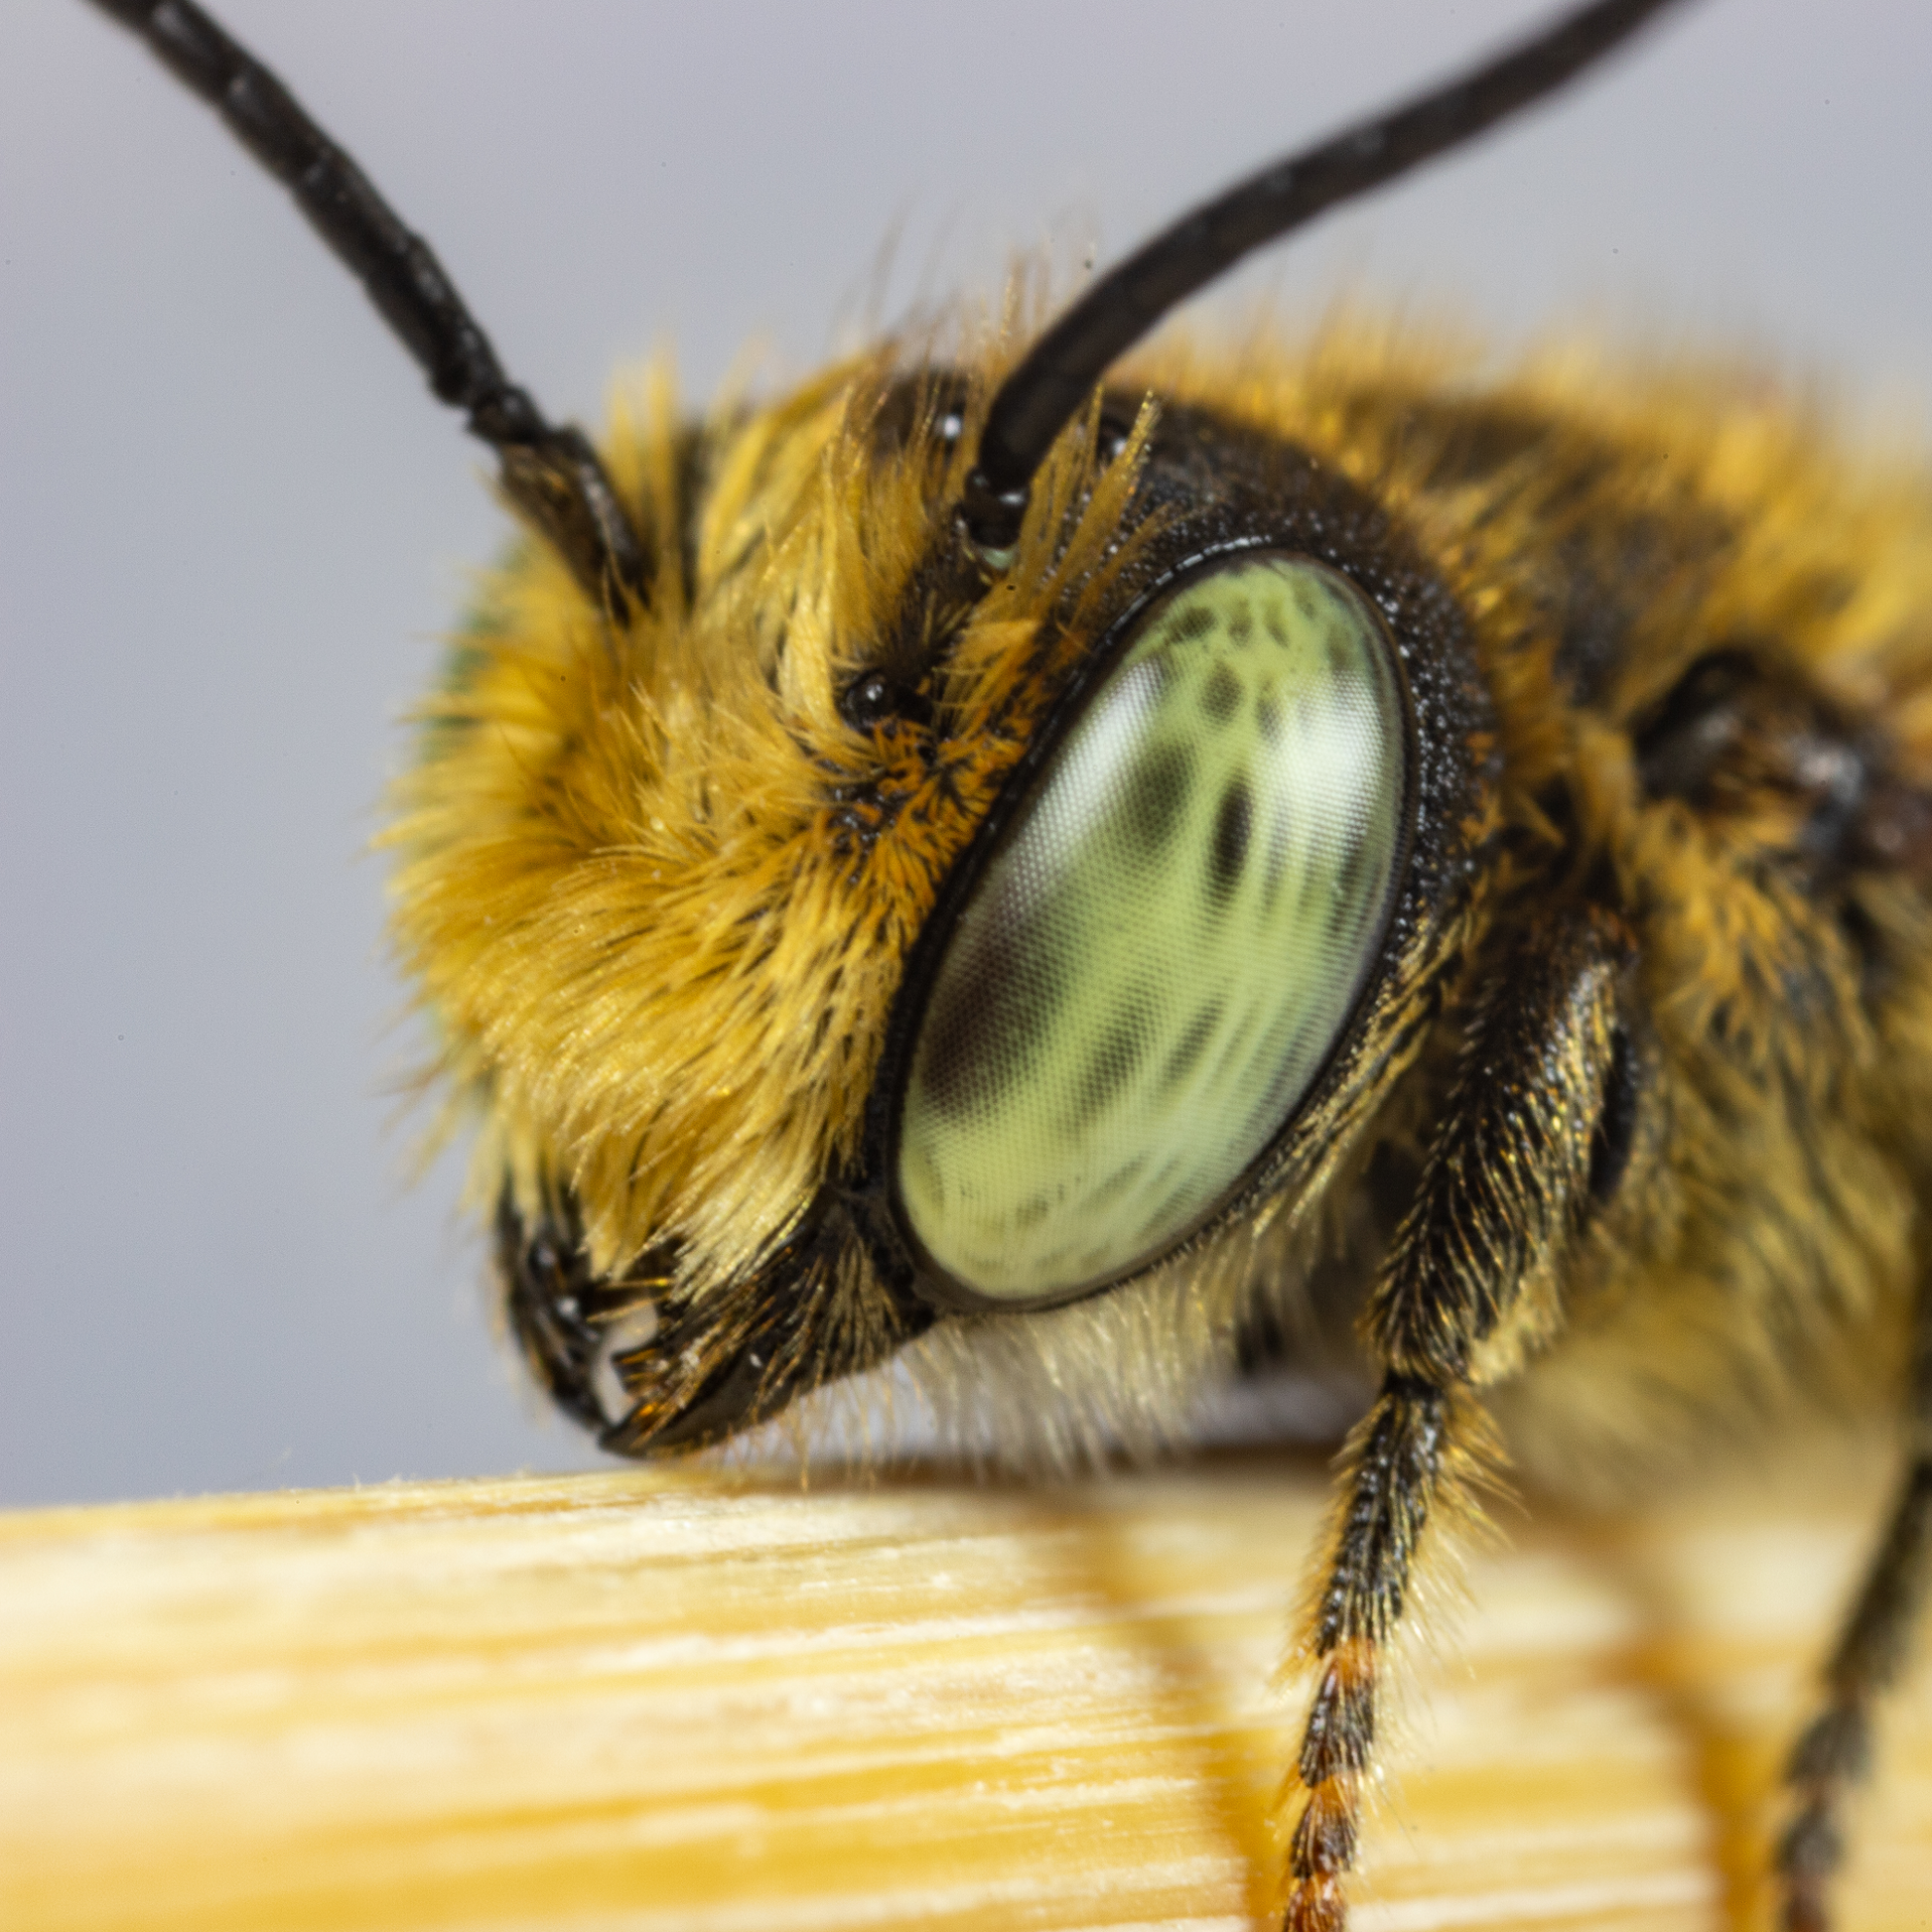 Close-up of a Leafcutter bee with vibrant green eyes